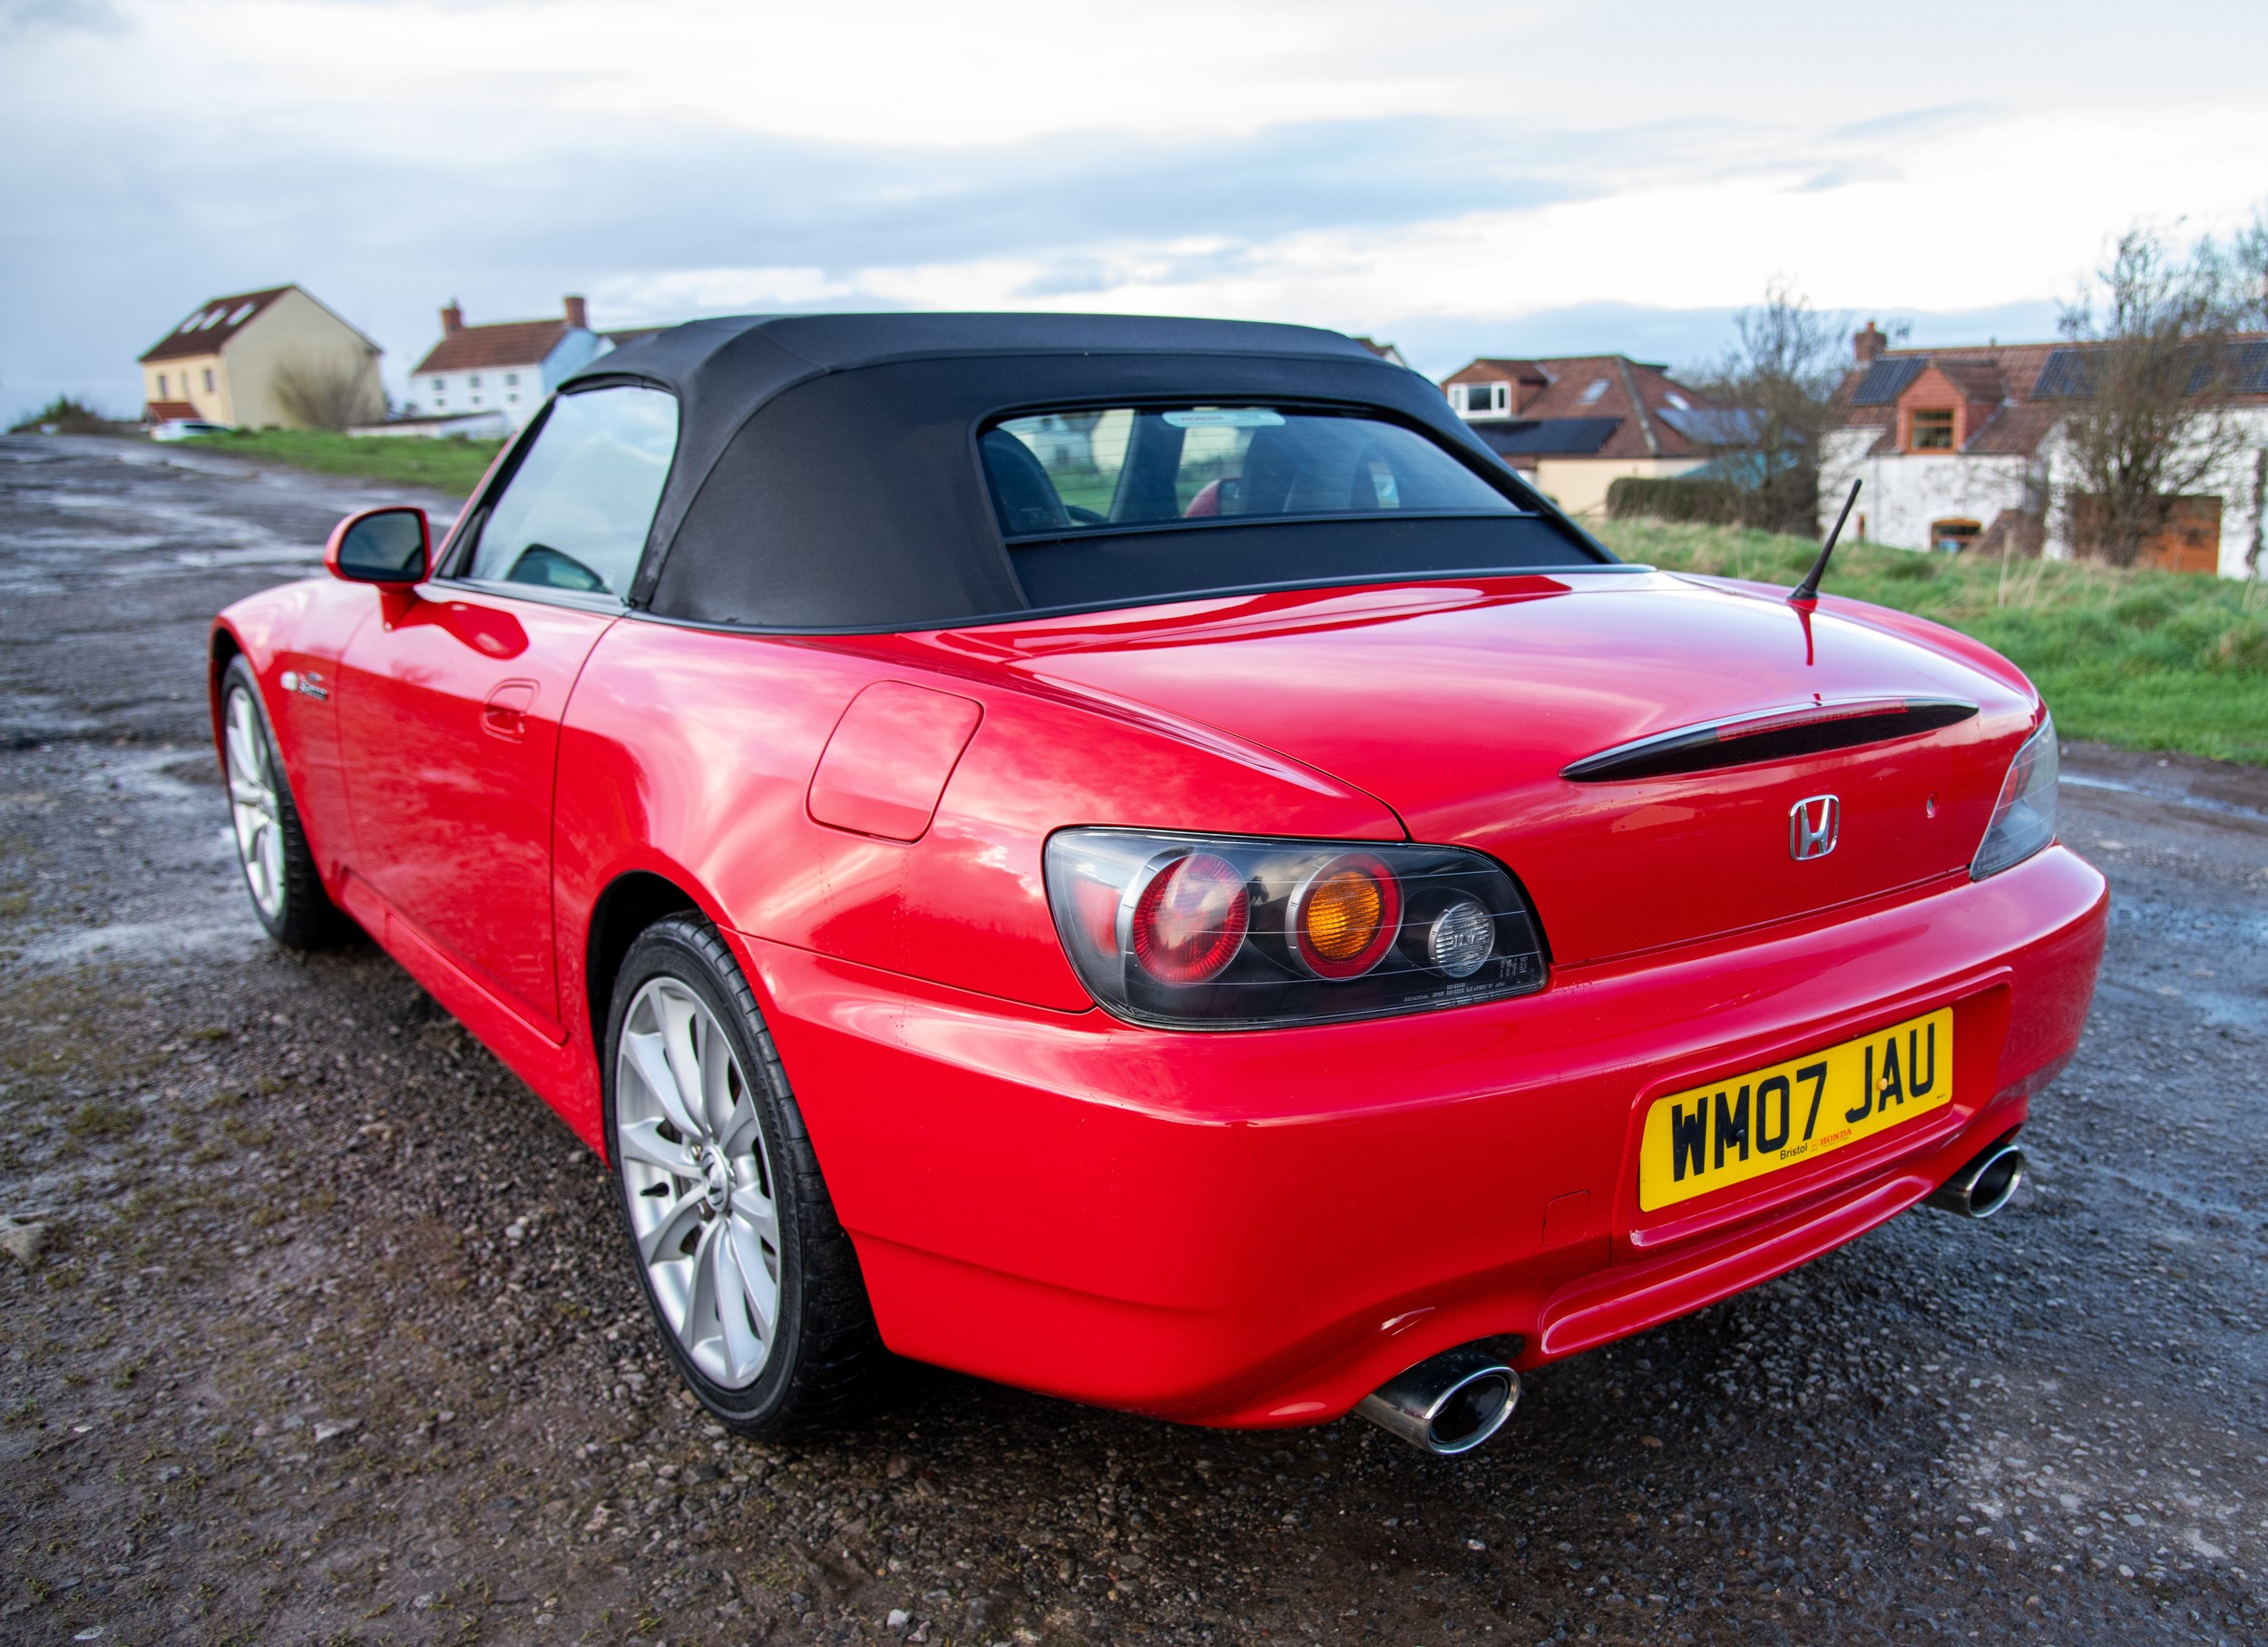 2007 HONDA S2000 Registration Number: WM07 JAU Chassis Number: JHMAP11207S200009 Recorded Mileage: - Image 16 of 26